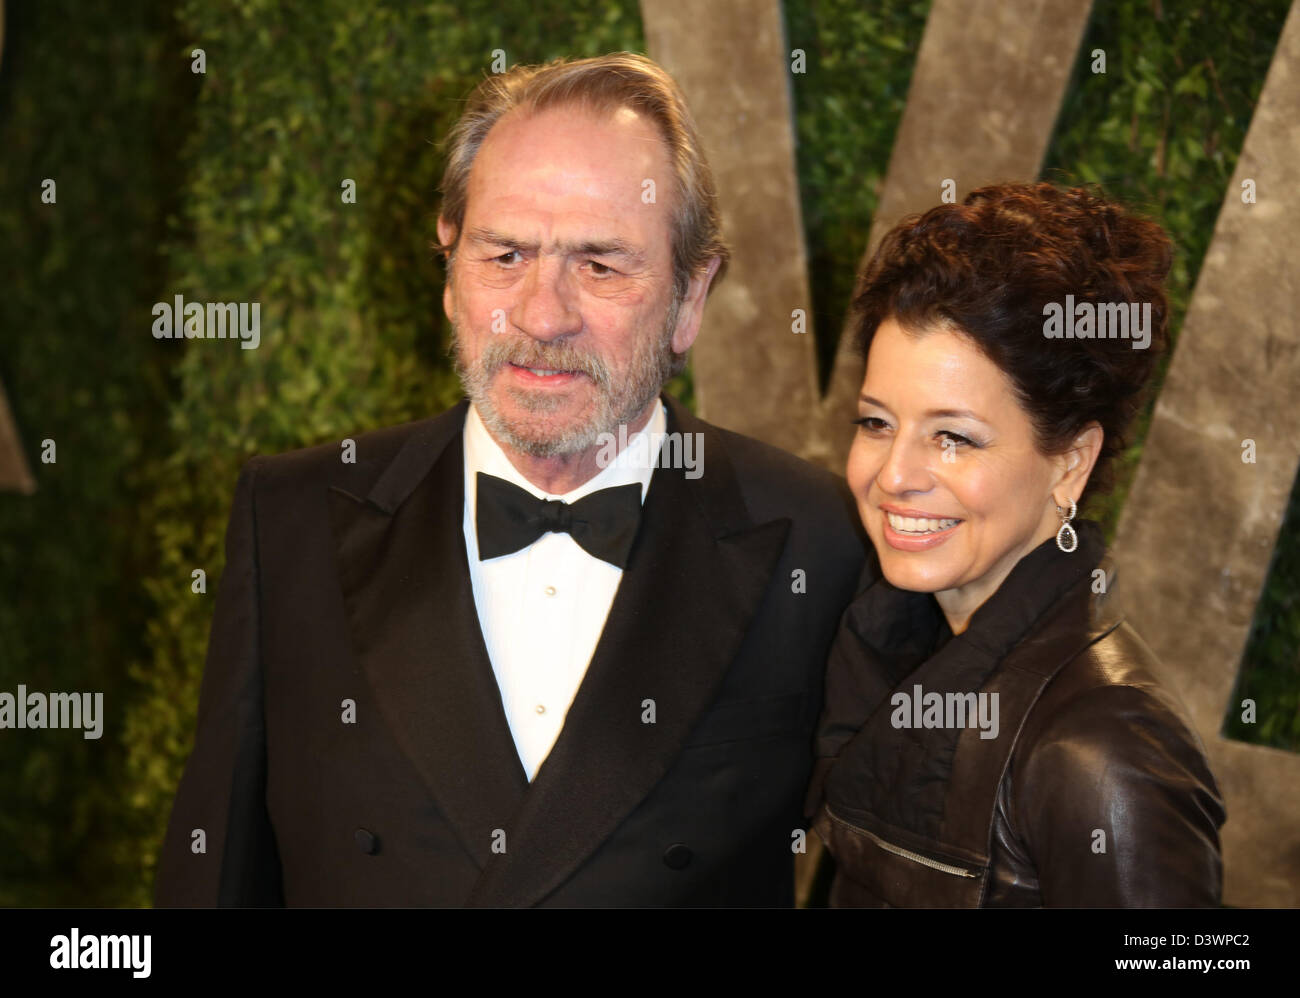 Actor Tommy Lee Jones and his wife Dawn Laurel-Jones arrive at the Vanity Fair Oscar Party at Sunset Tower in West Hollywood, Los Angeles, USA, on 24 February 2013. Photo: Hubert Boesl Stock Photo